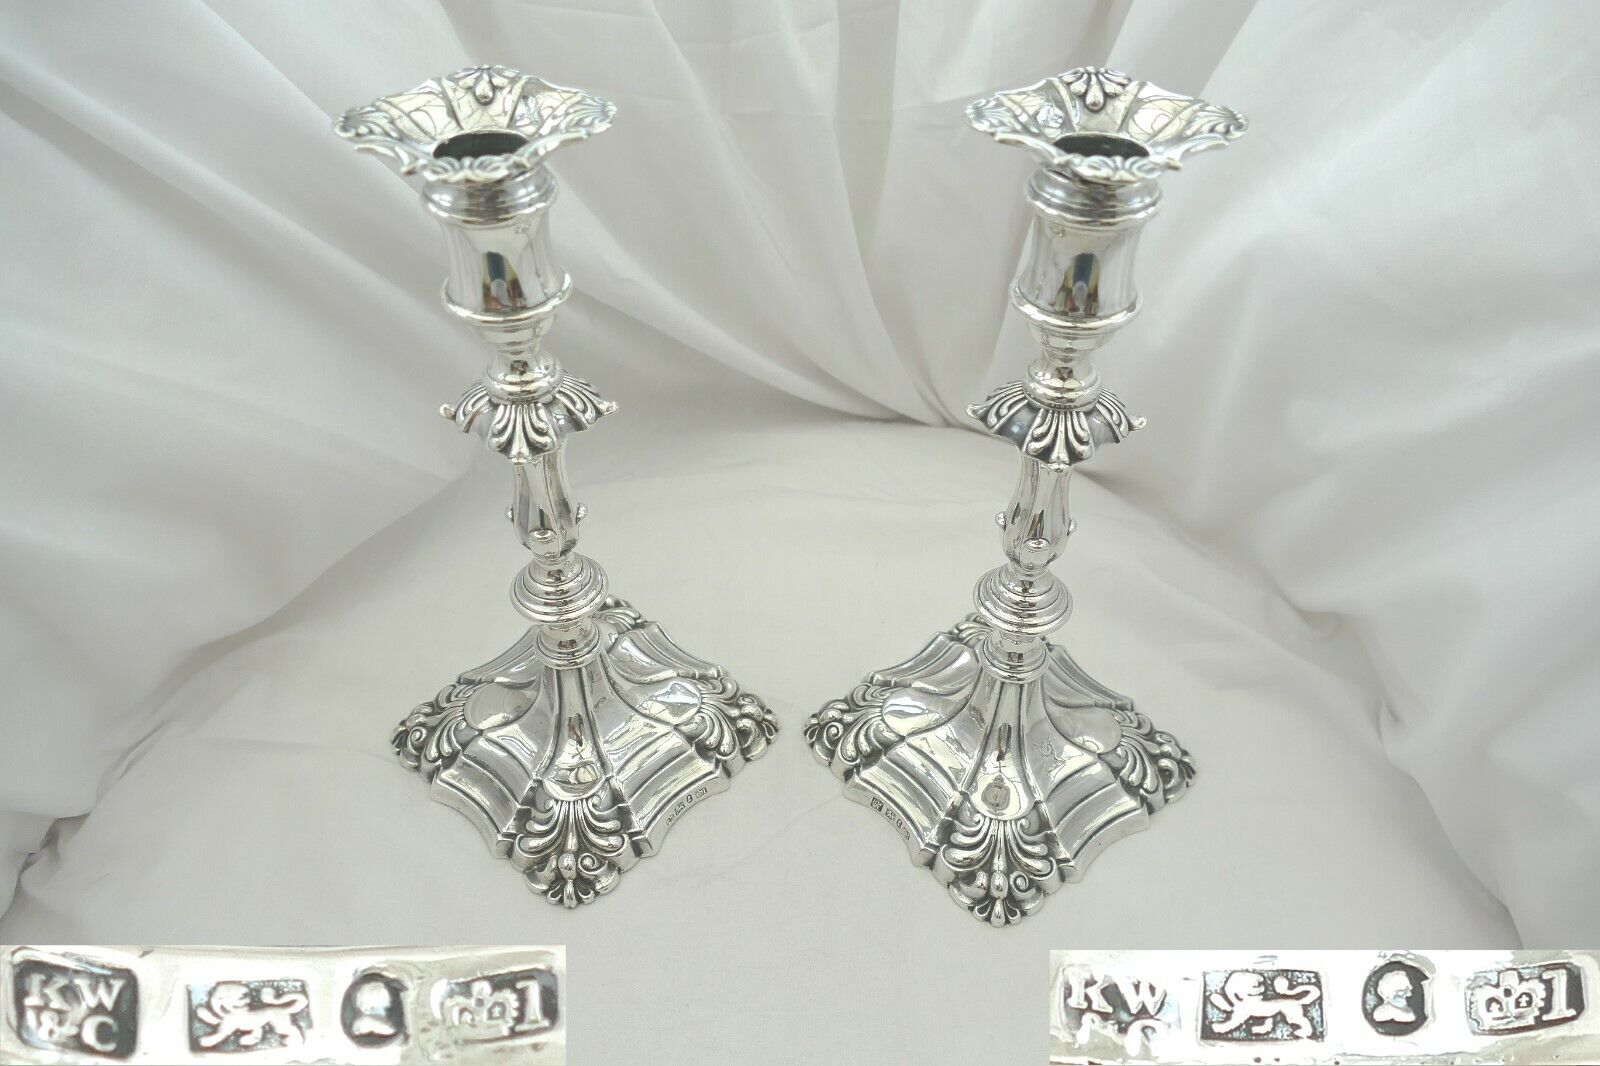 RARE PAIR WILLIAM IV HM STERLING SILVER CANDLESTICKS 1833